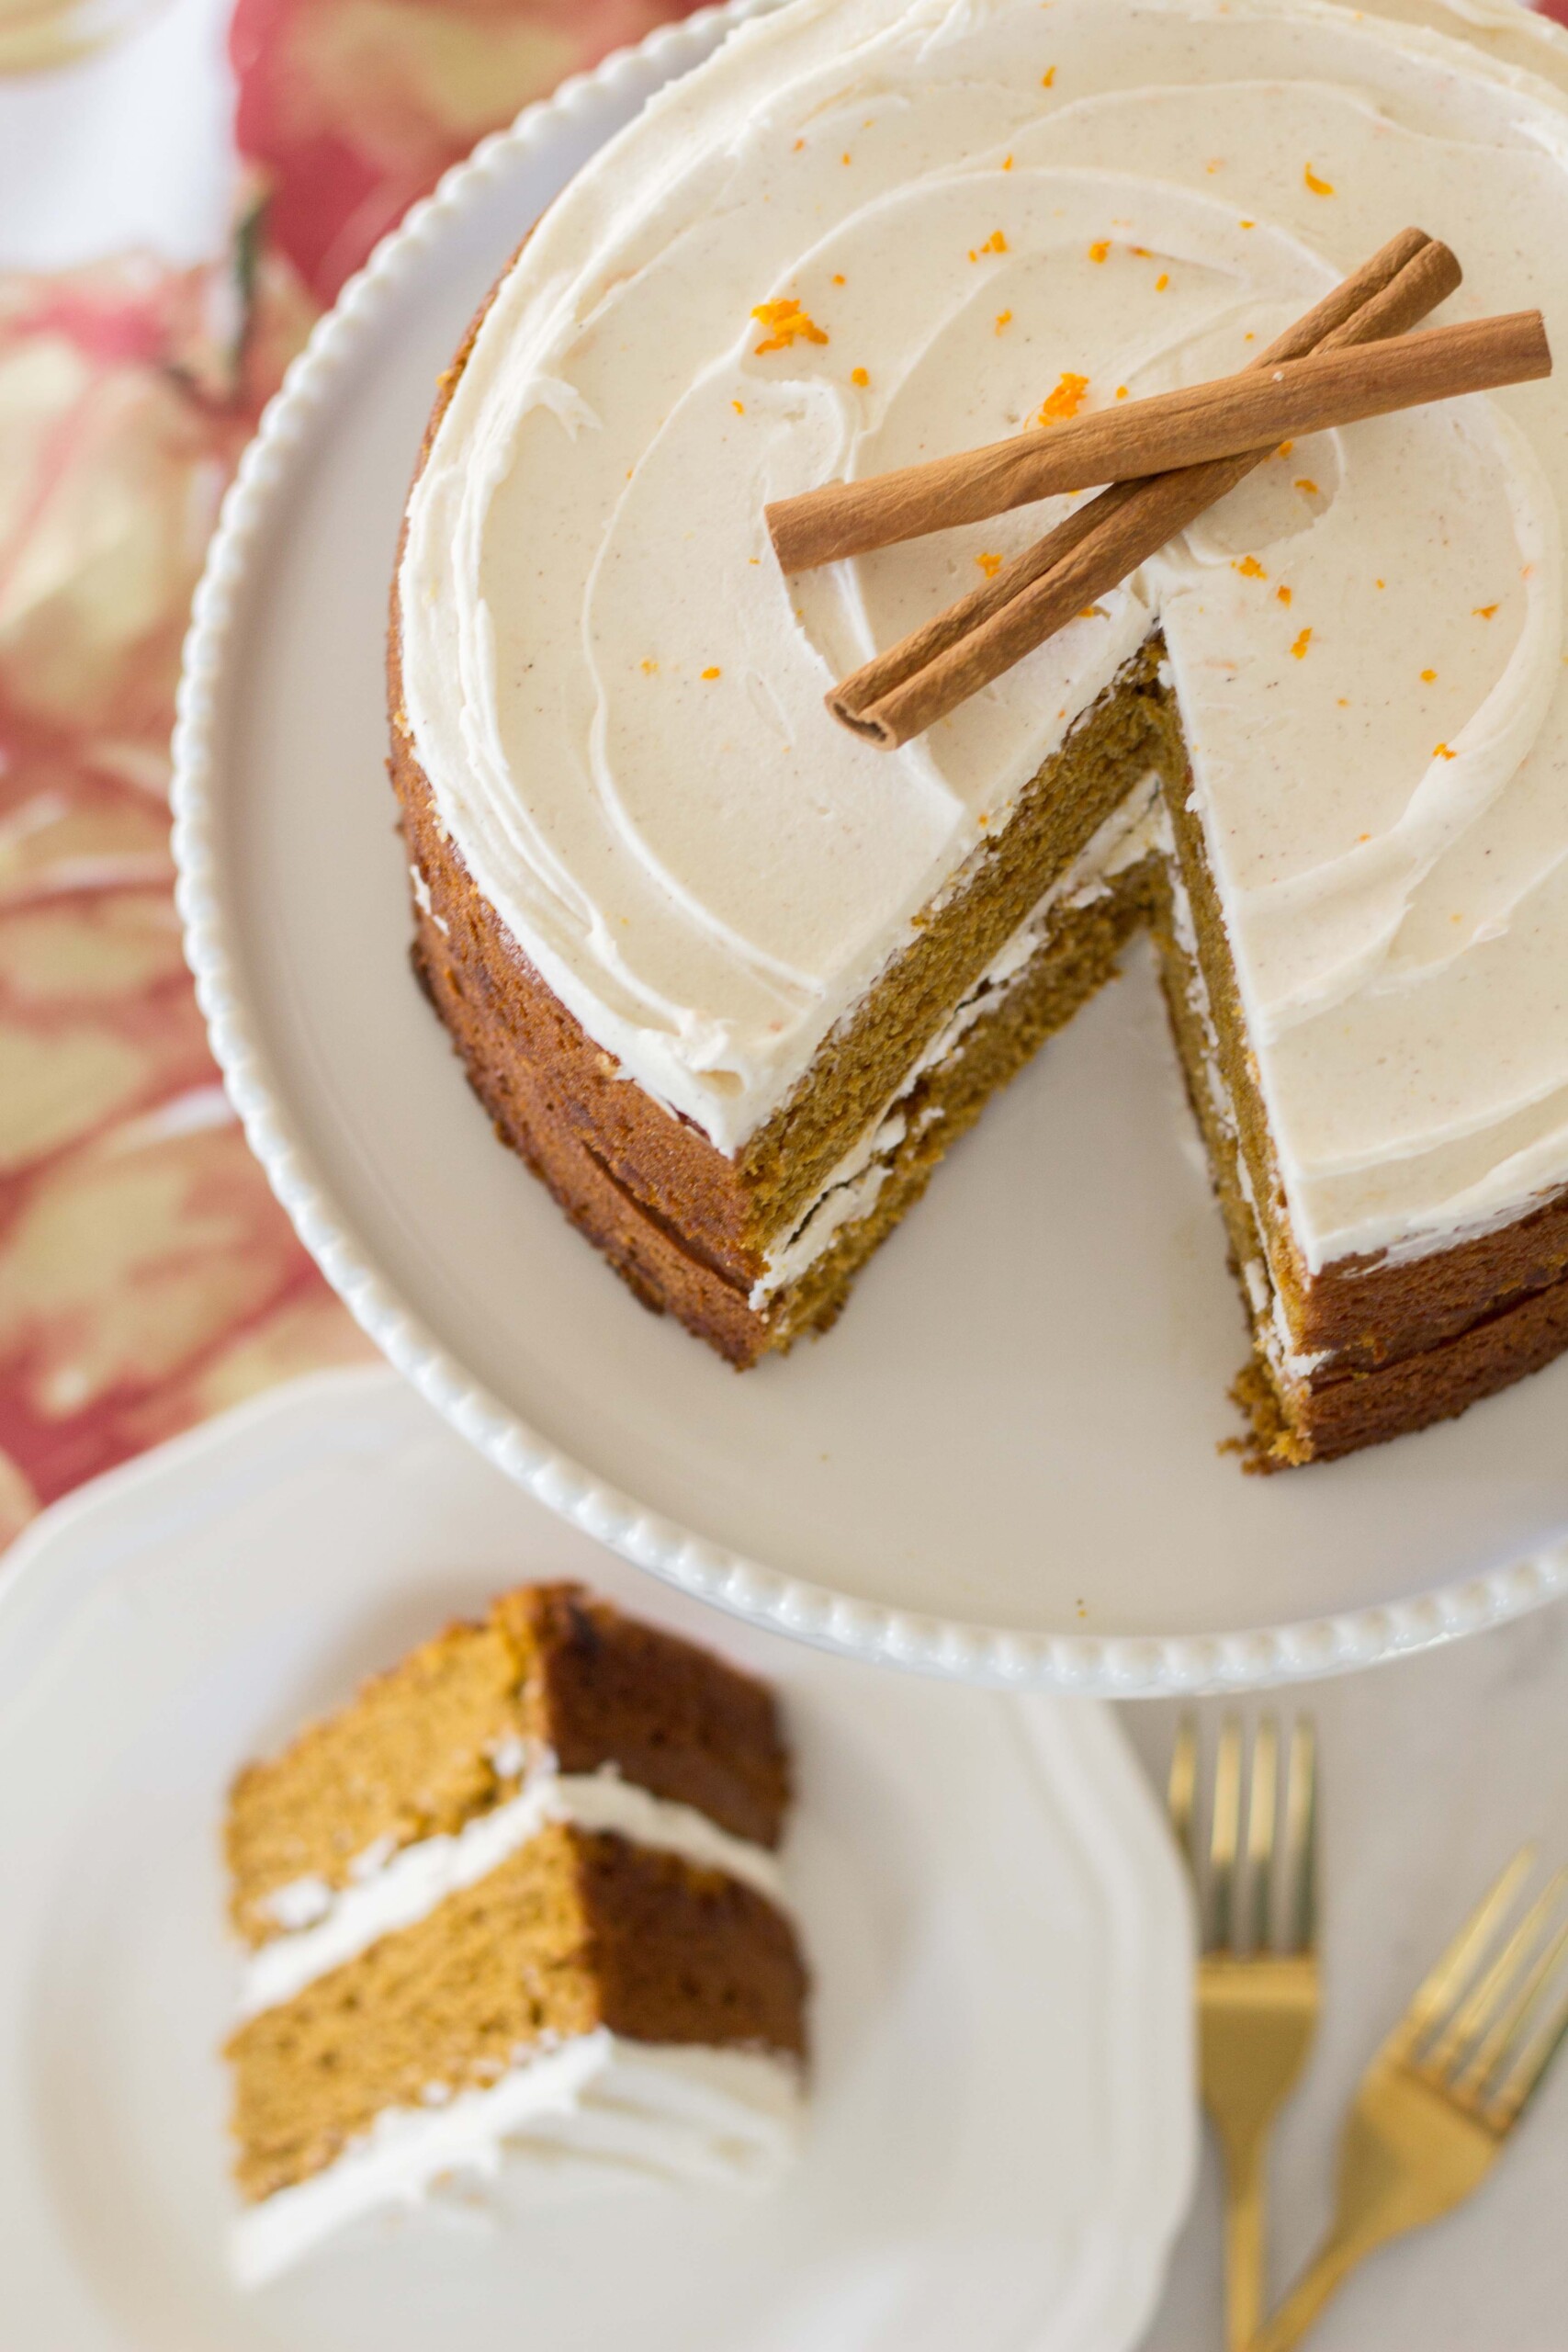 6 Fall Recipes You Will Love
autumn spiced carrot cake